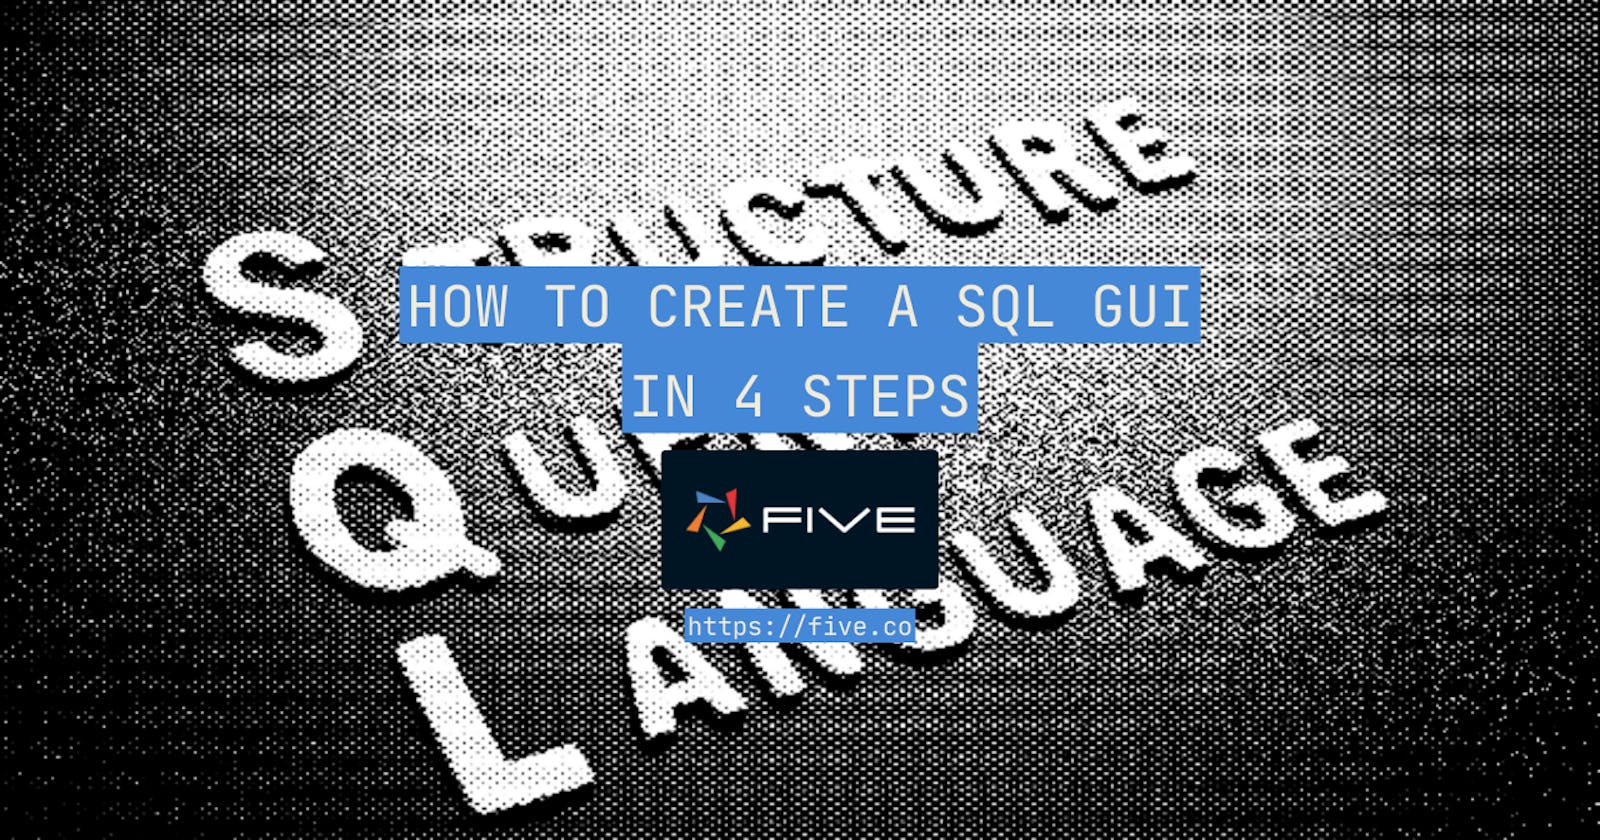 How to Create a SQL GUI in 4 Steps